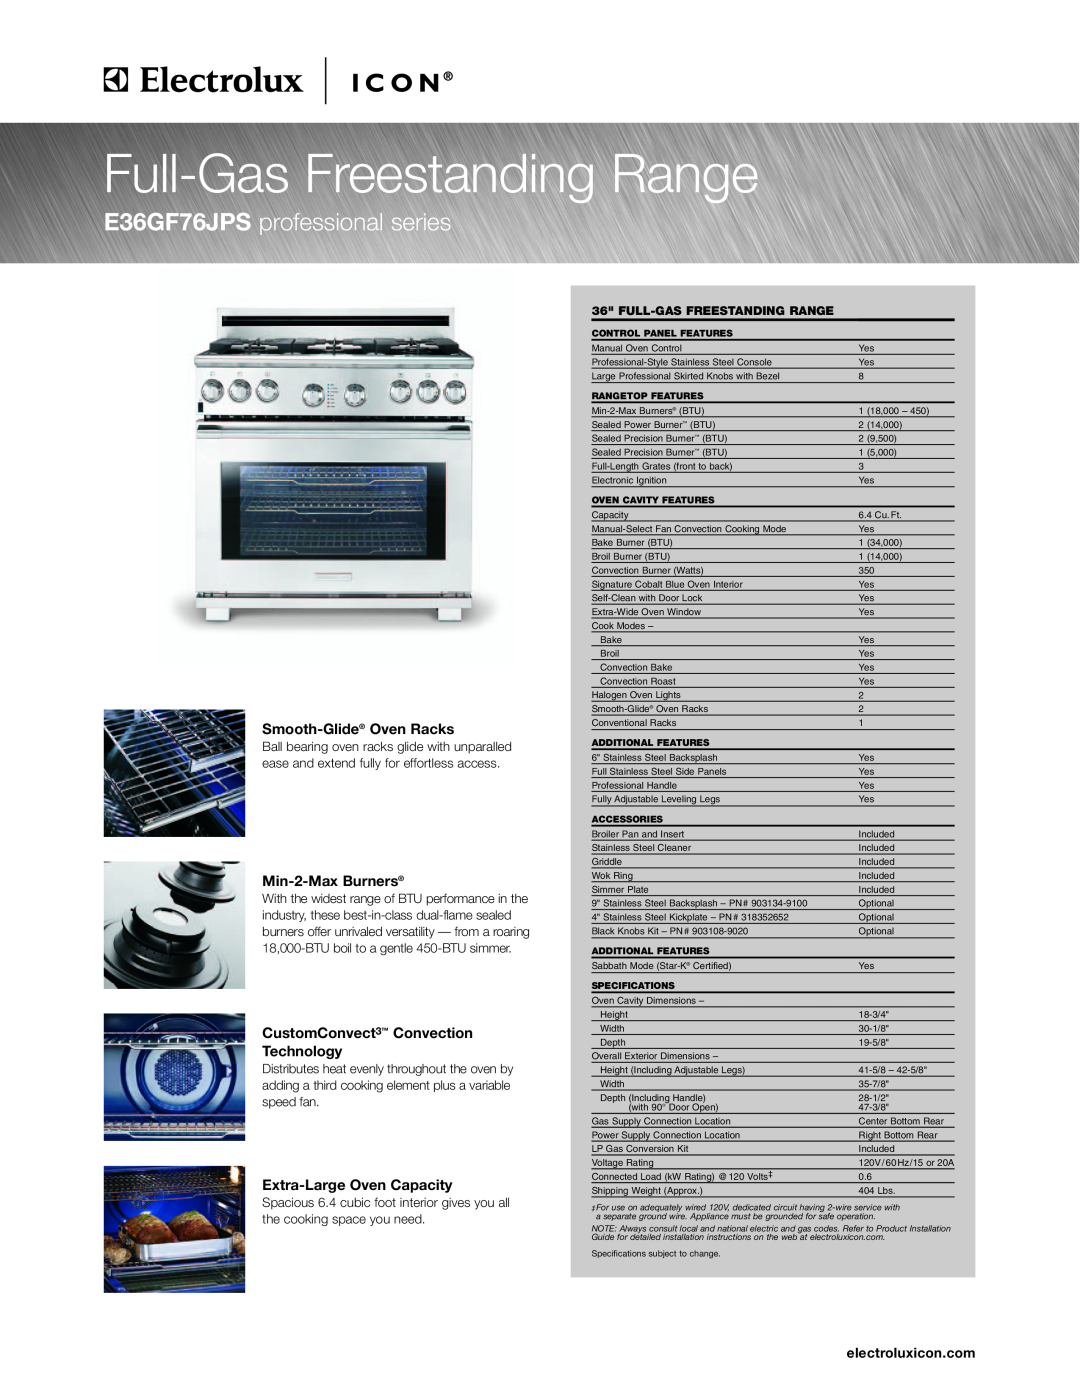 Electrolux specifications electroluxicon.com, Full-Gas Freestanding Range, E36GF76JPS professional series 